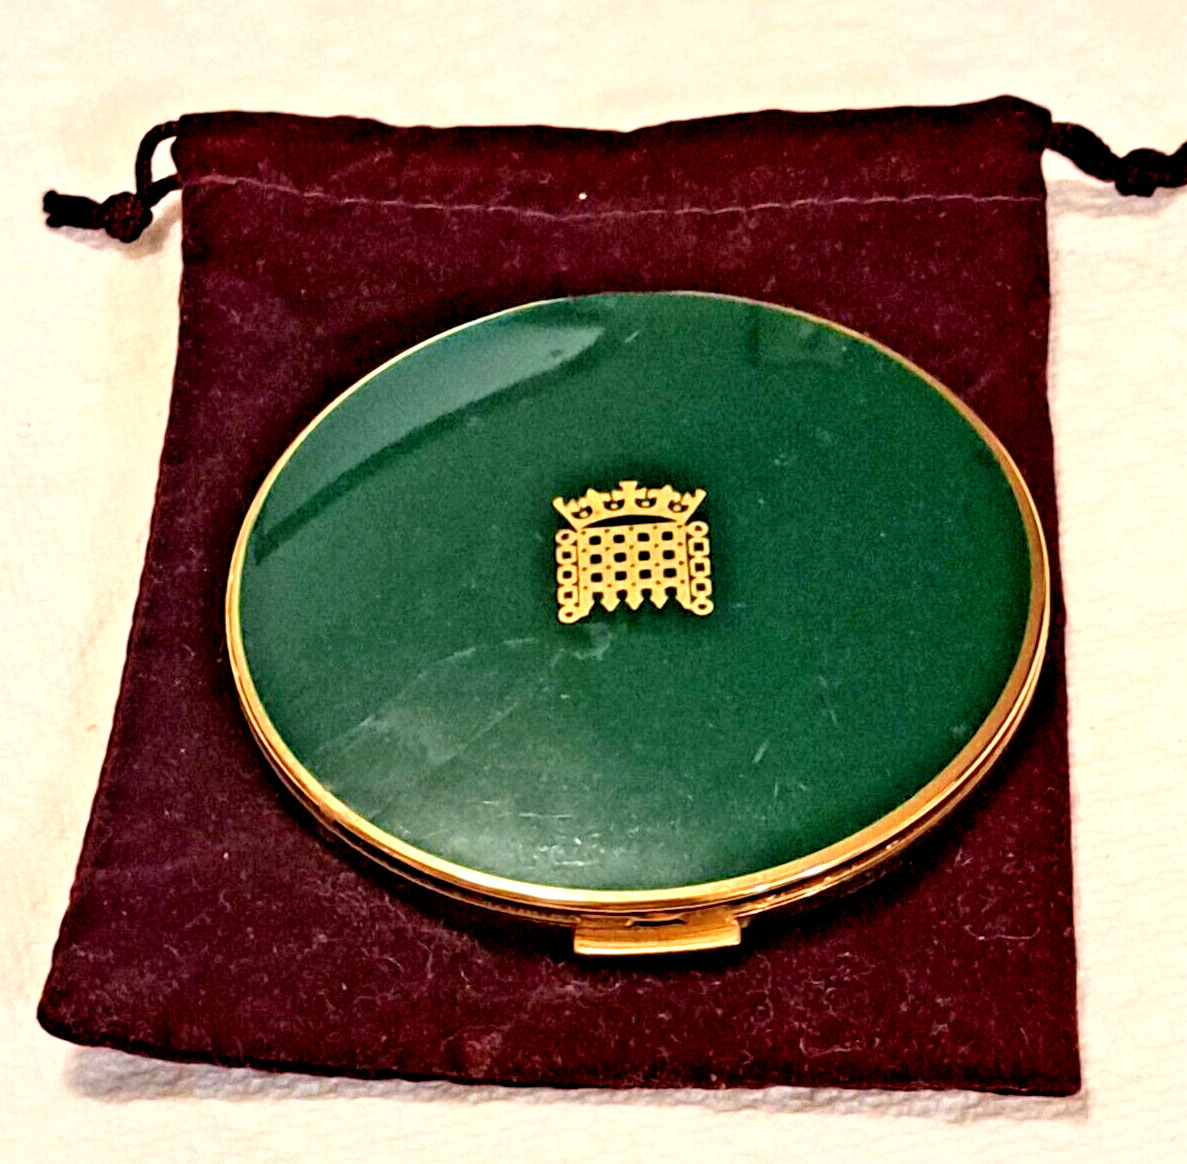 Vintage Stratton Cosmetic Compact Green Enamel Gold Rimmed Powder 50's